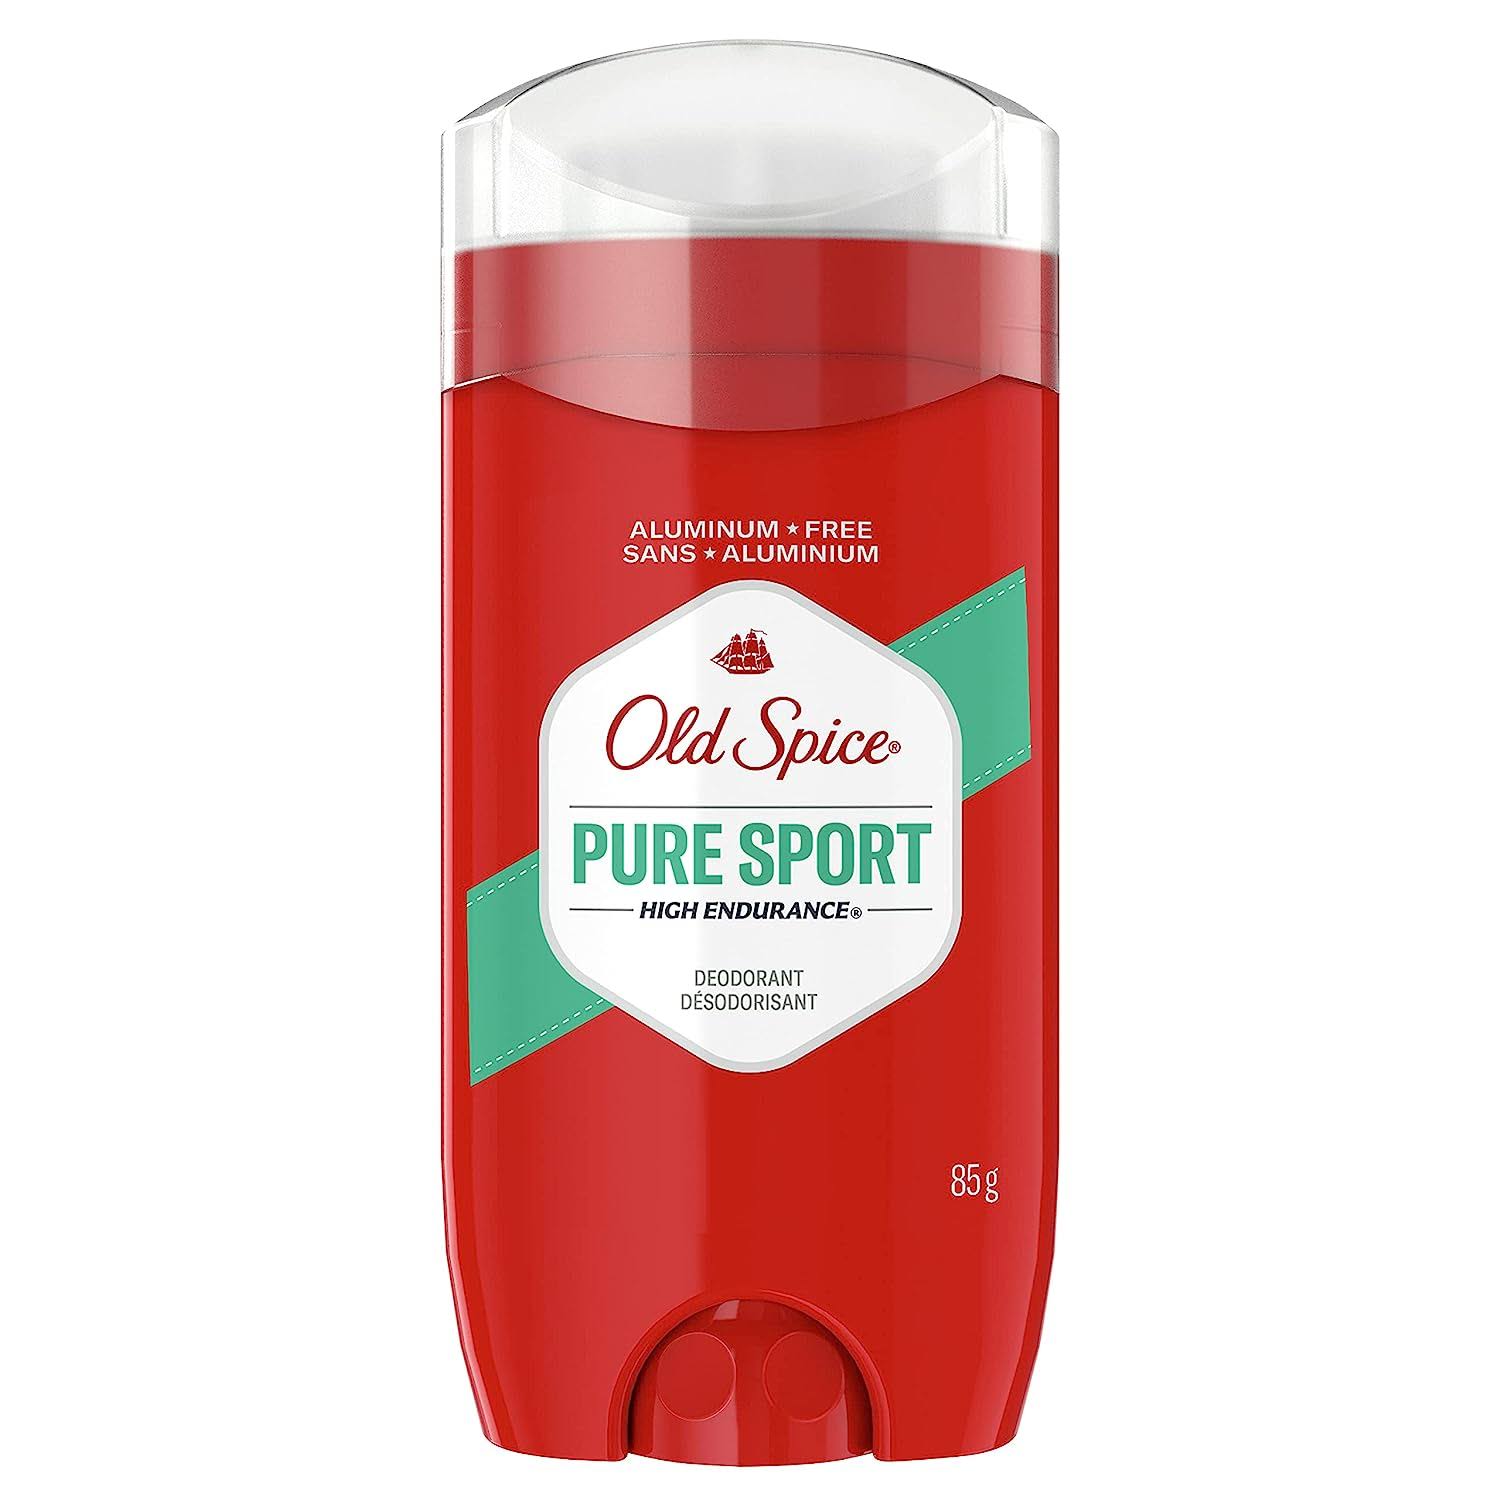 Old Spice High Endurance Long Lasting Deodorant - Pure Sport, 85g